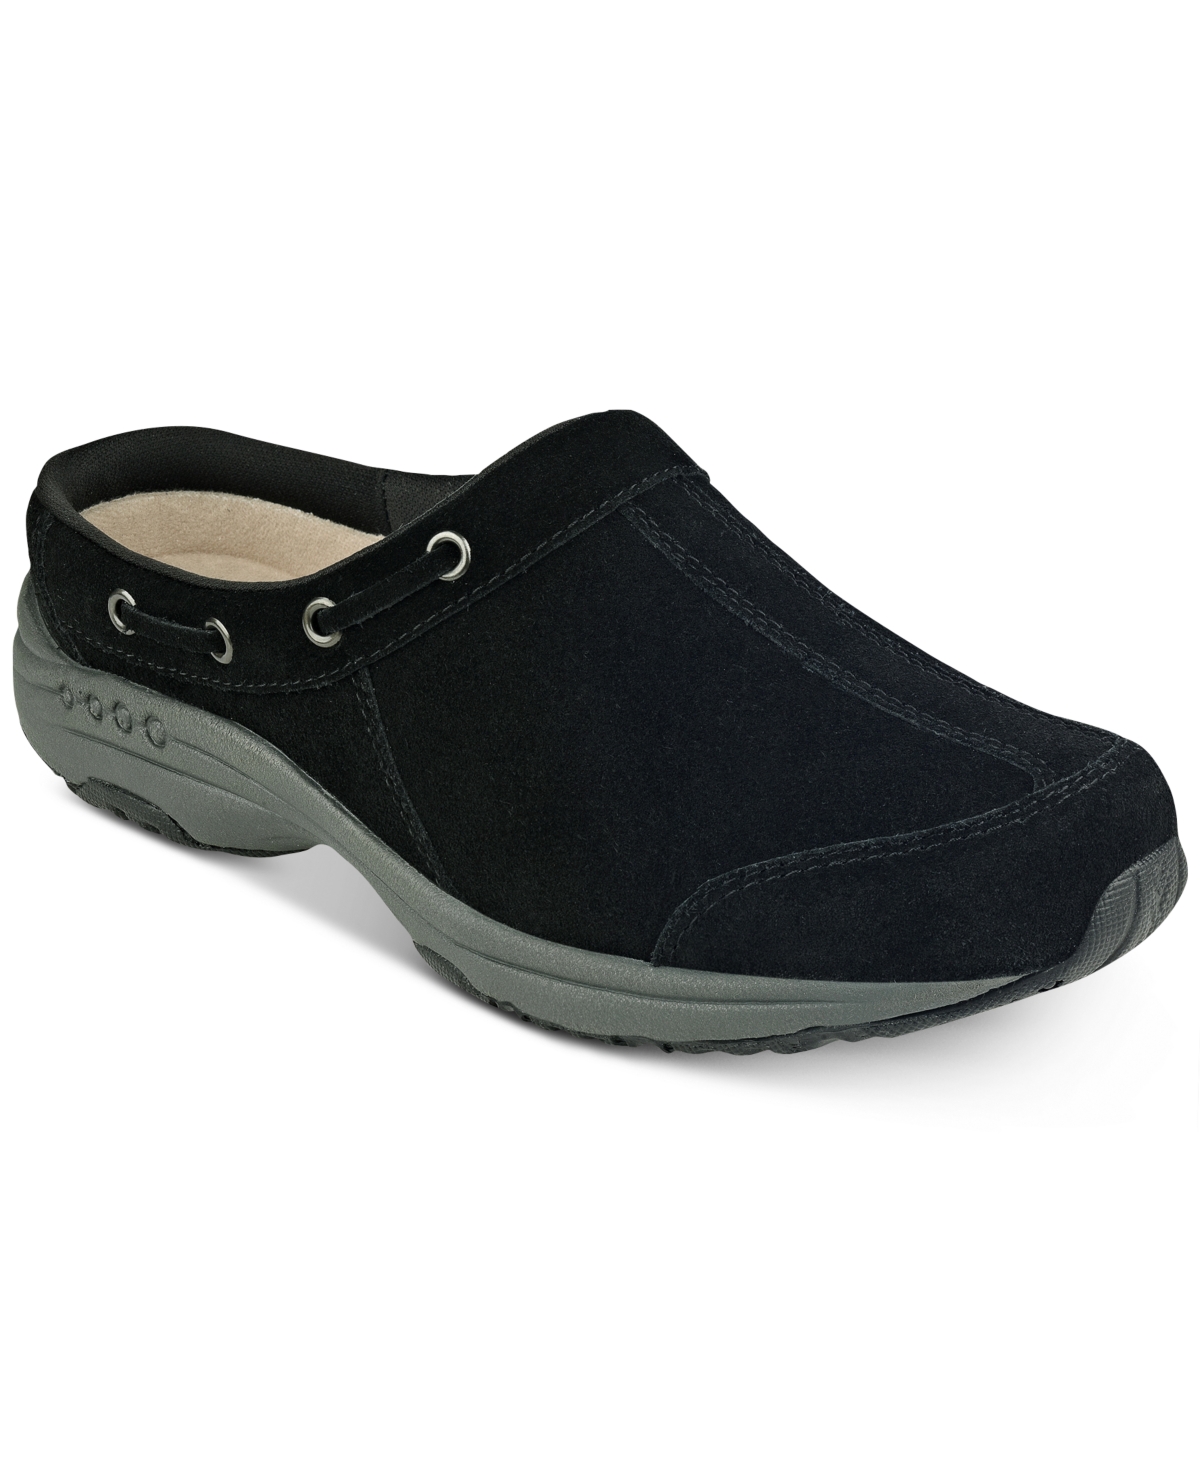 UPC 191656849188 product image for Easy Spirit Women's Travelport Round Toe Casual Slip-on Mules Women's Shoes | upcitemdb.com